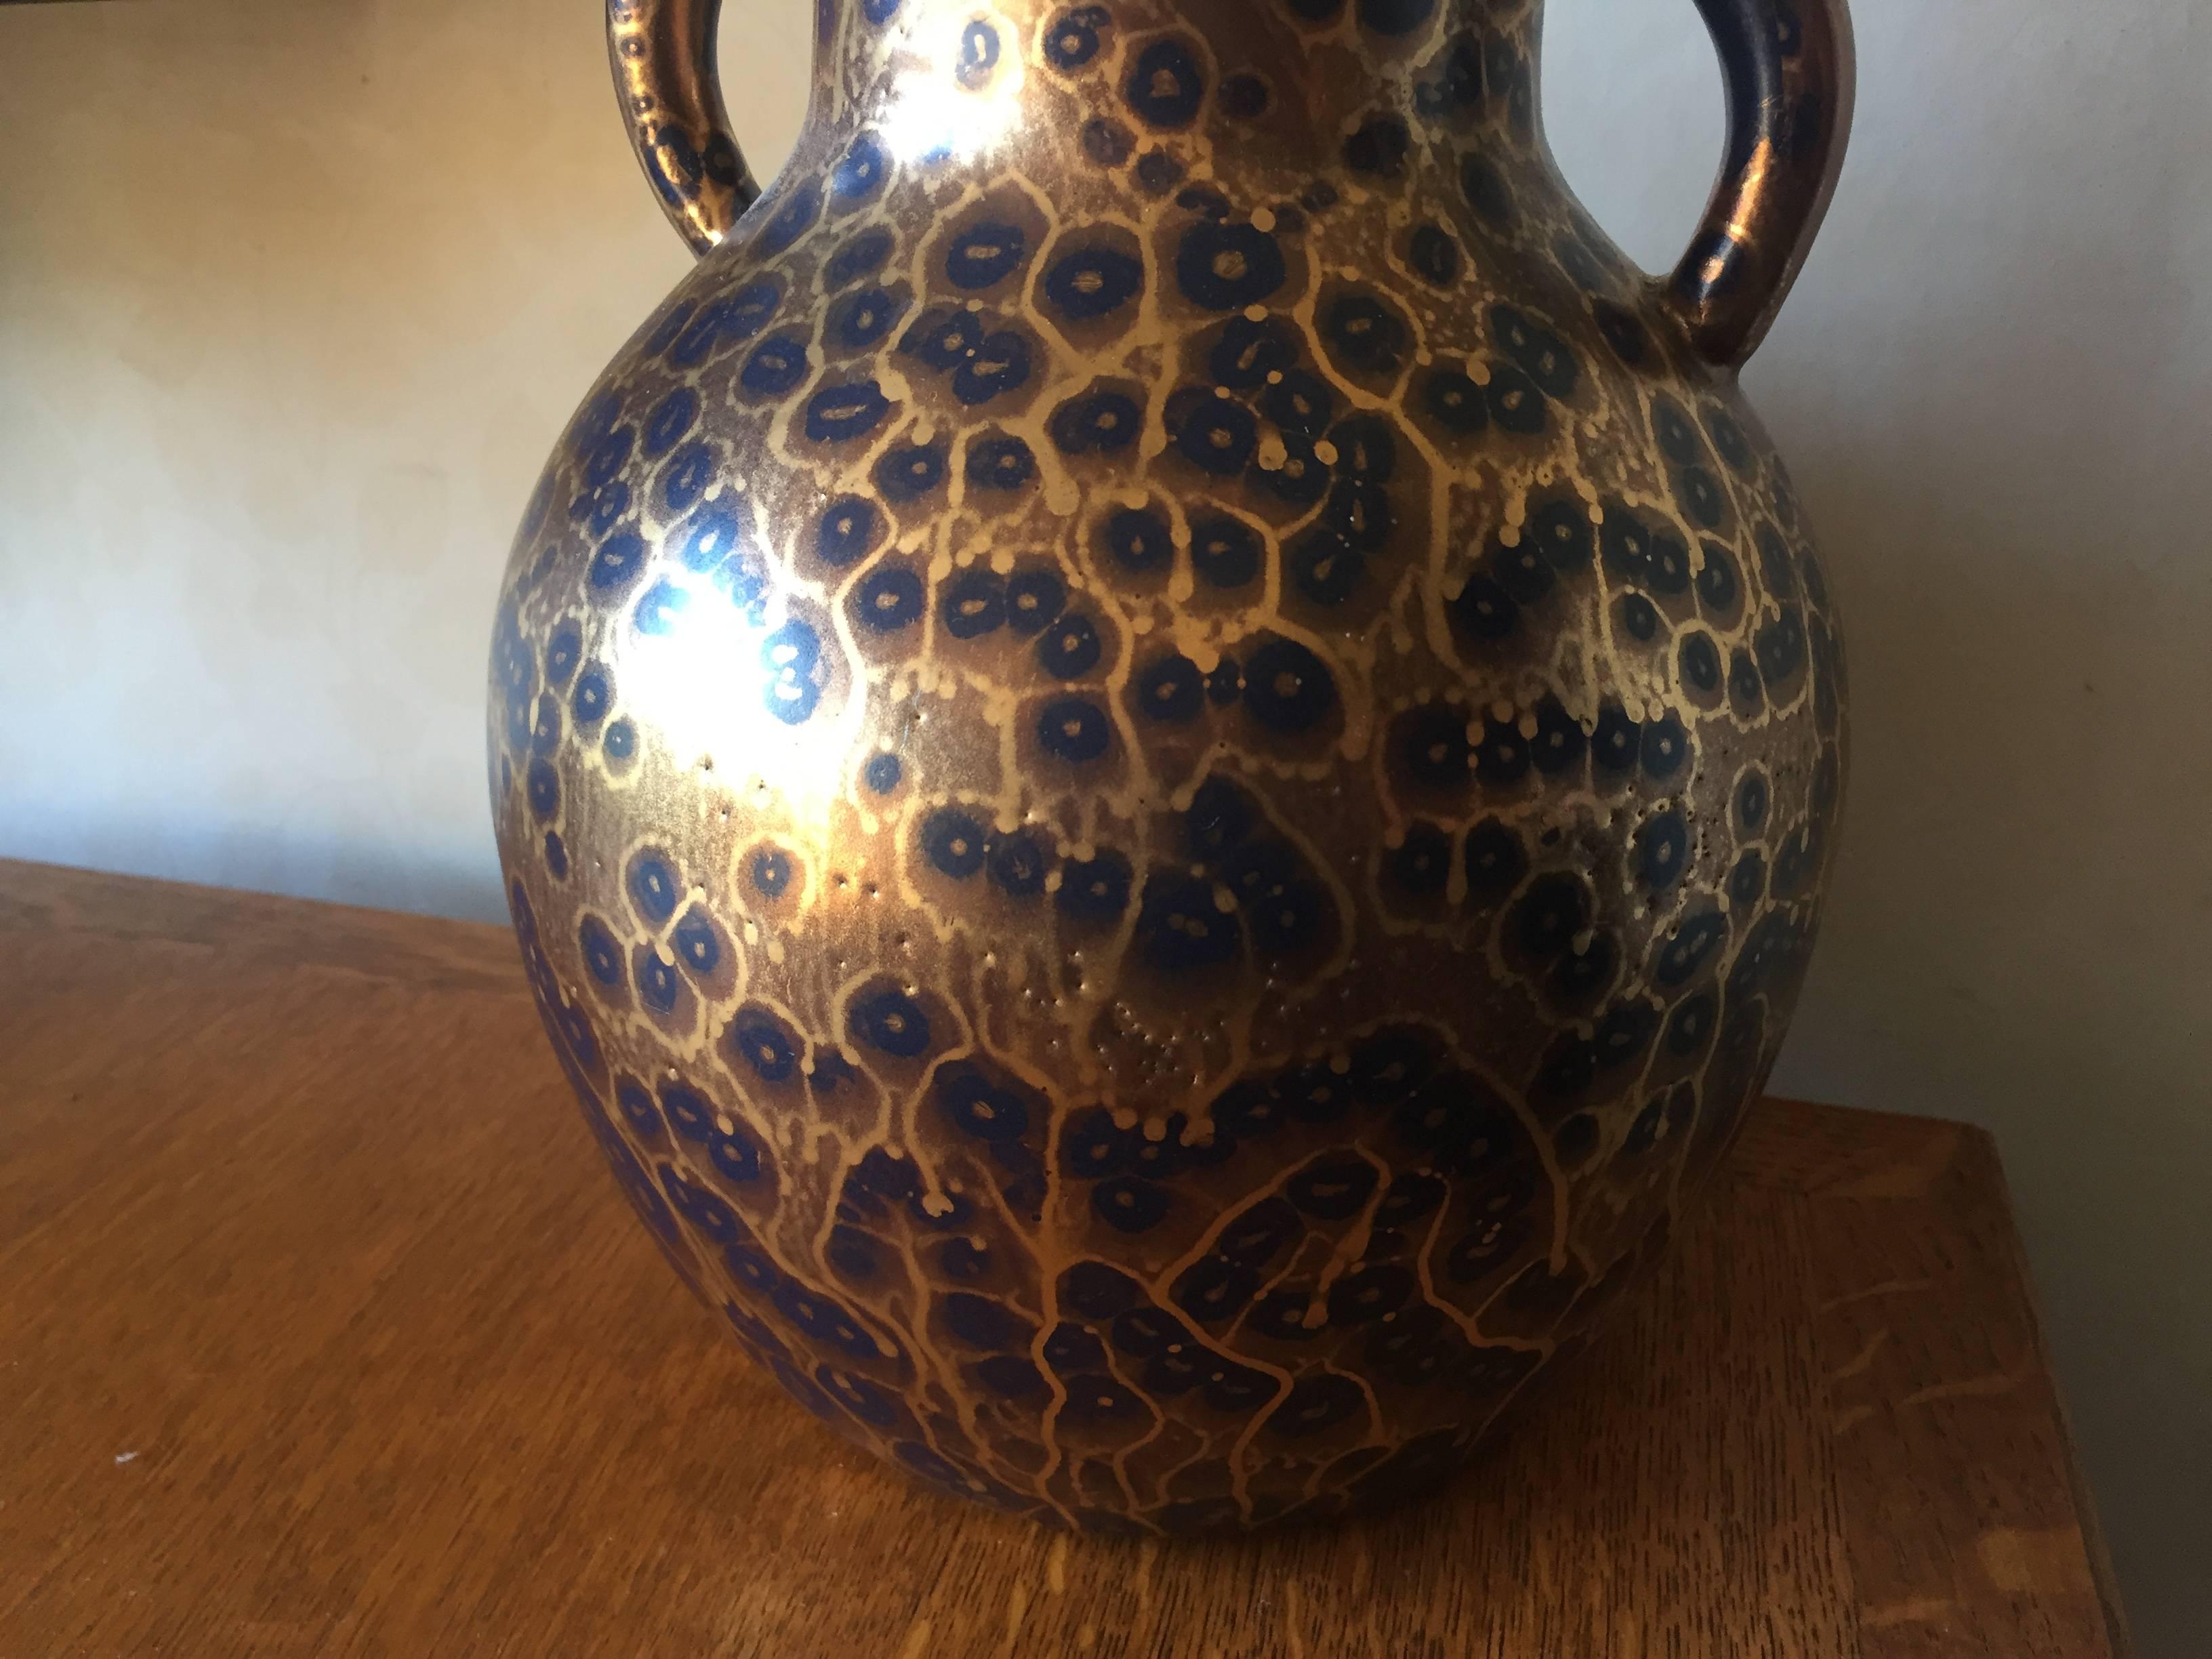 Striking deep blue glazed shouldered vase with handles covered in a unique gold glaze. The signature to the base for Leon Pointu 1879-1942 who worked with this technique in the 1930s. This is a large piece and very imposing. Based in St Amand en